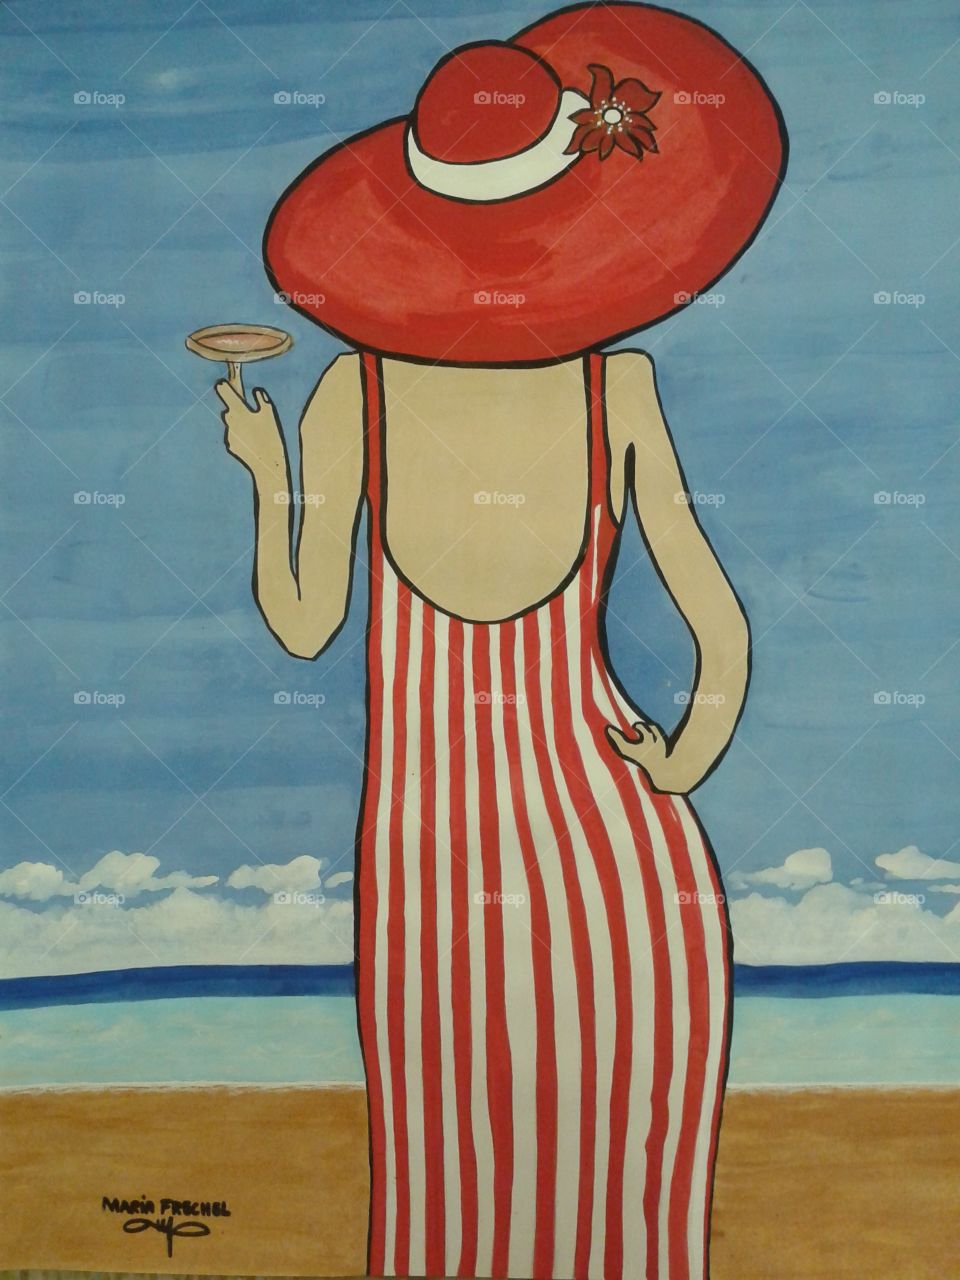 Lady on Beach. I painted this.